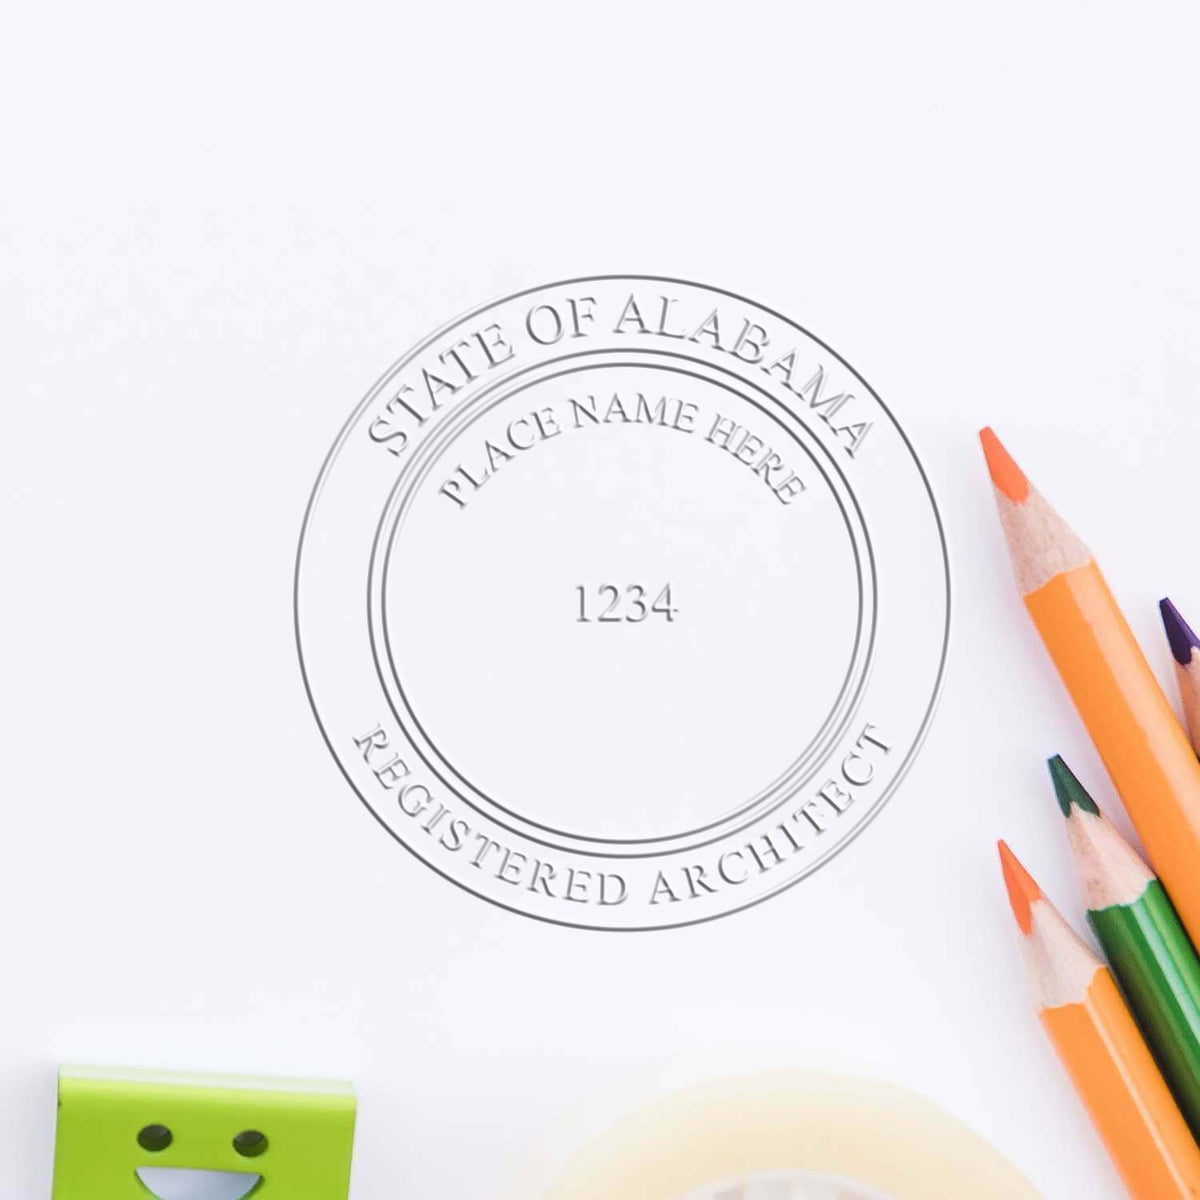 A stamped imprint of the Gift Alabama Architect Seal in this stylish lifestyle photo, setting the tone for a unique and personalized product.